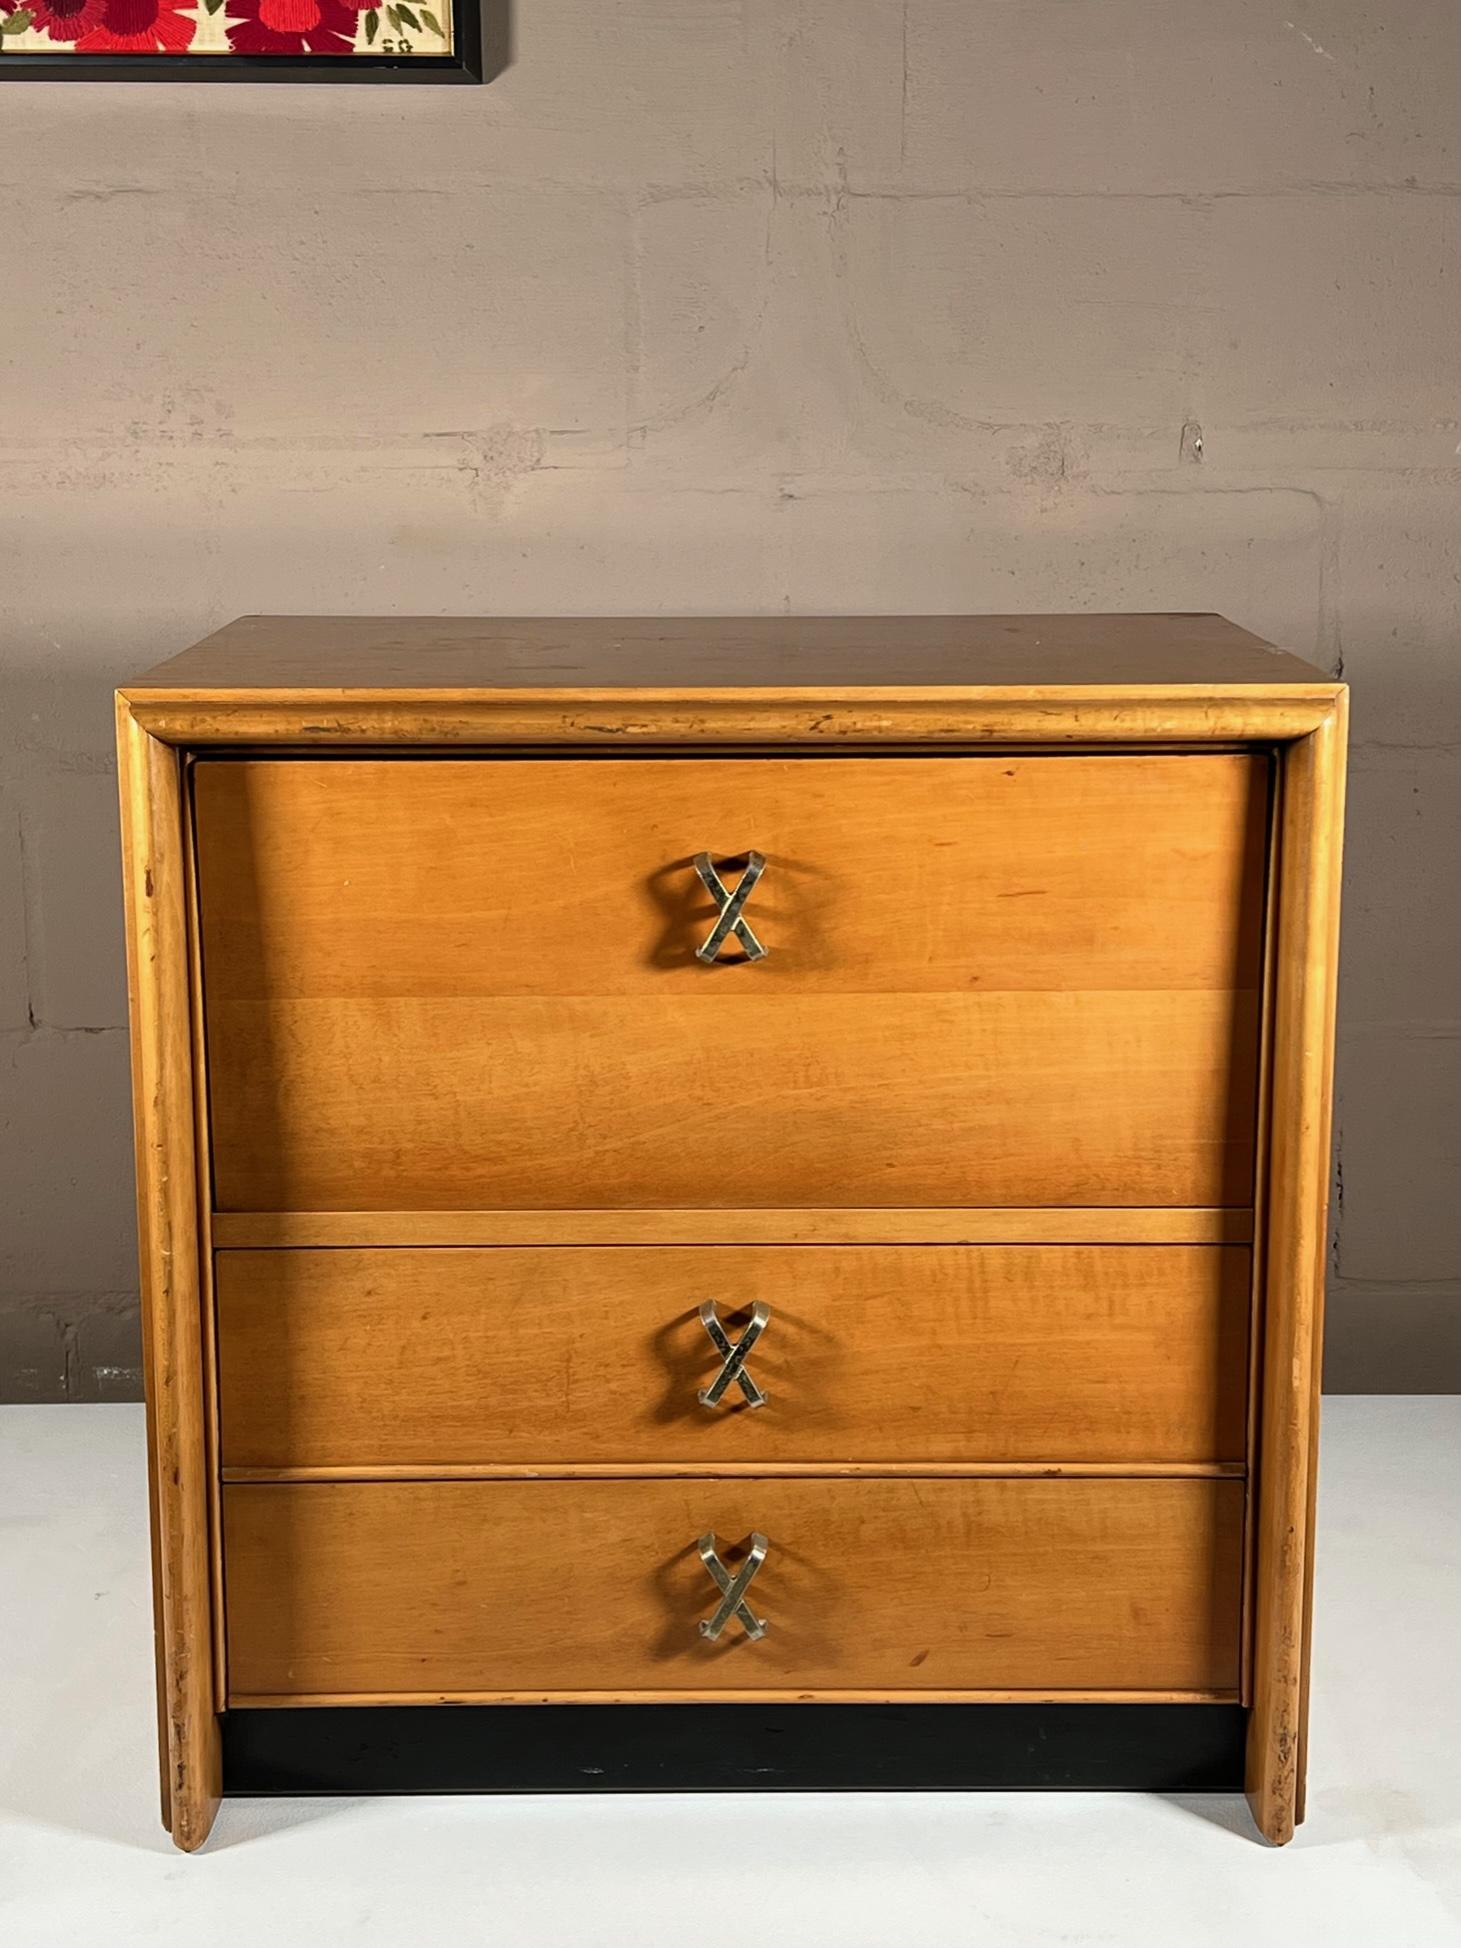 A classic nightstand designed by Paul Frankl for John Stuart, ca' 1950s. Nickeled X handles, drop down front with 2 drawers below. Original finish in good condition.